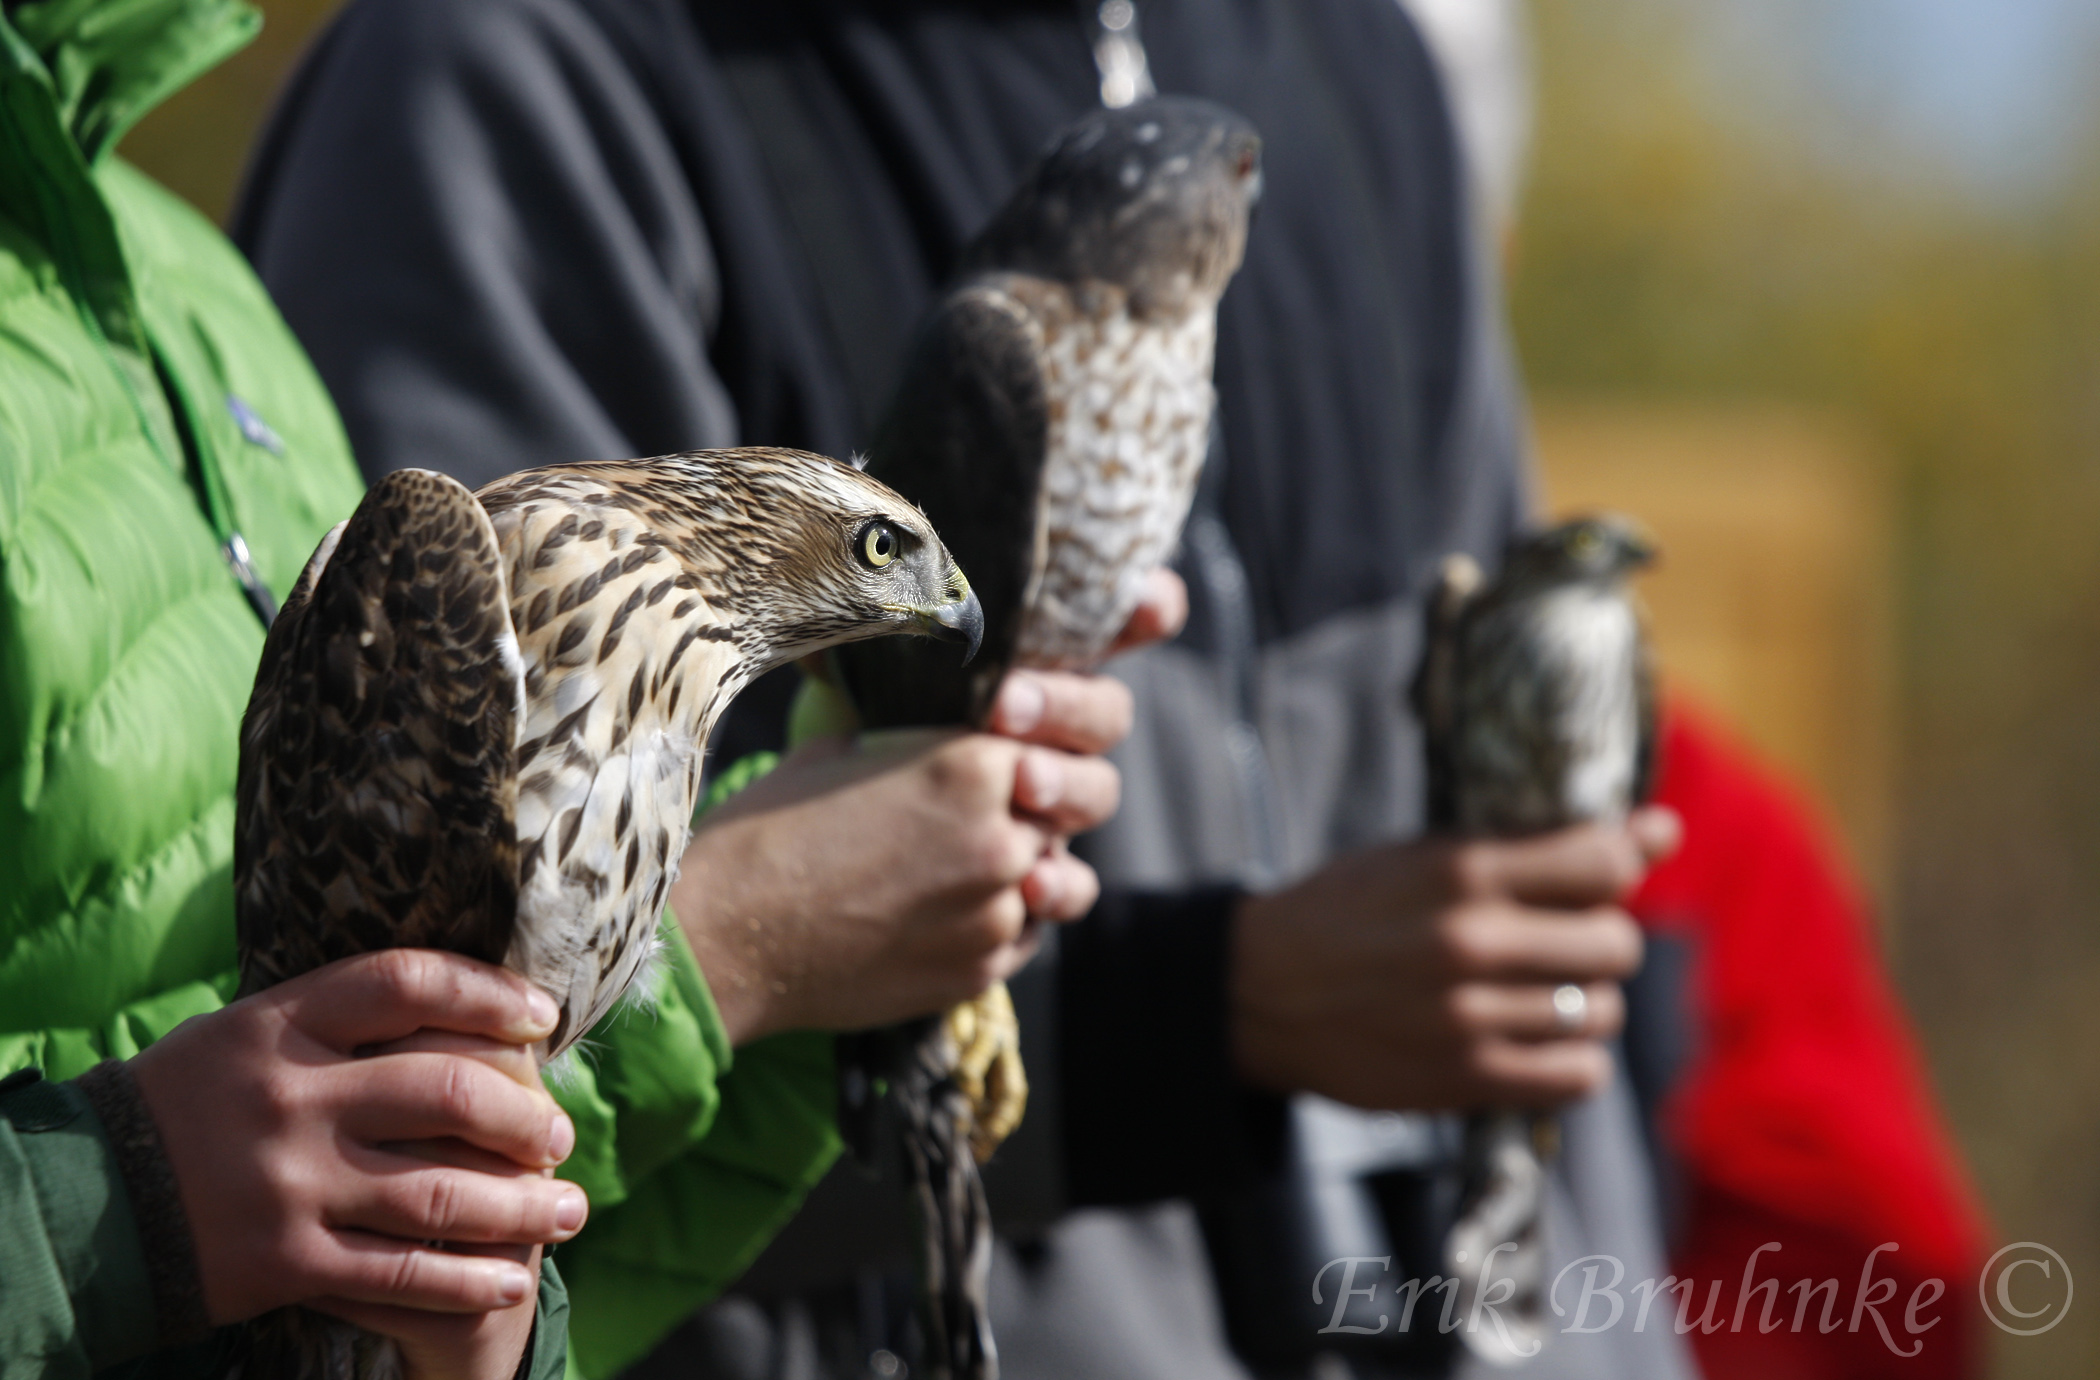 From left to right - Juvenile Northern Goshawk, adult Coopers Hawk, juvenile Sharp-shinned Hawk